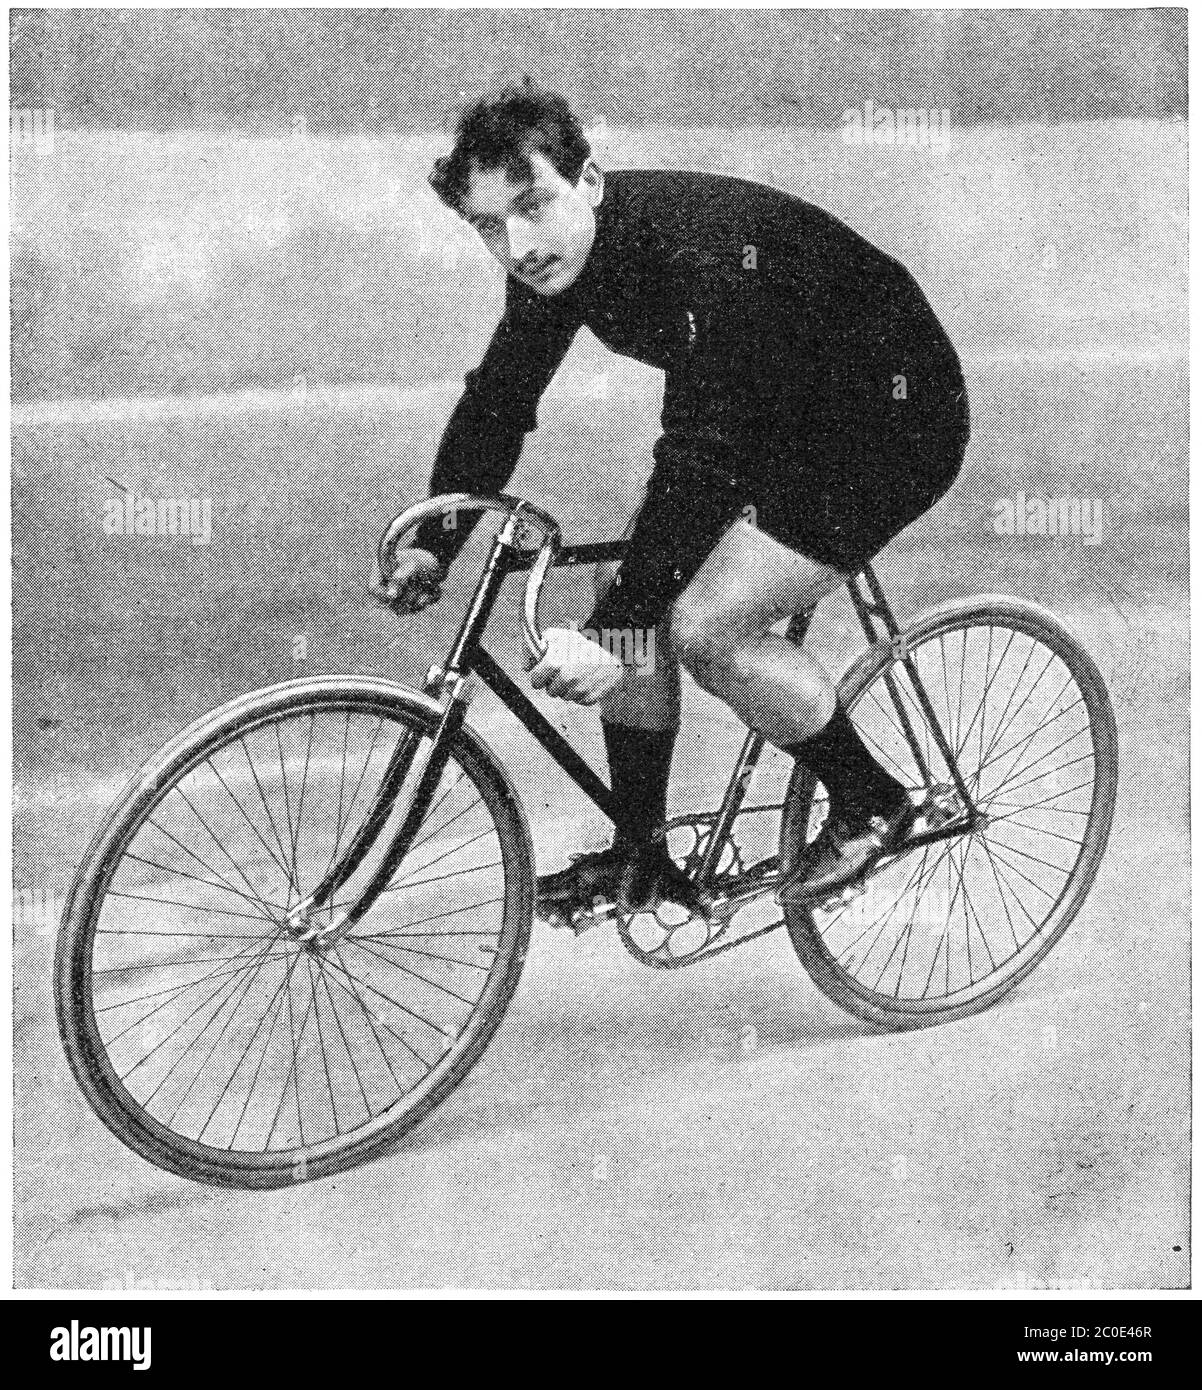 The winner of the Track cycling Grand Prix de Paris (1895, 1896, 1897) - Ludovic Morin. Illustration of the 19th century. White background. Stock Photo